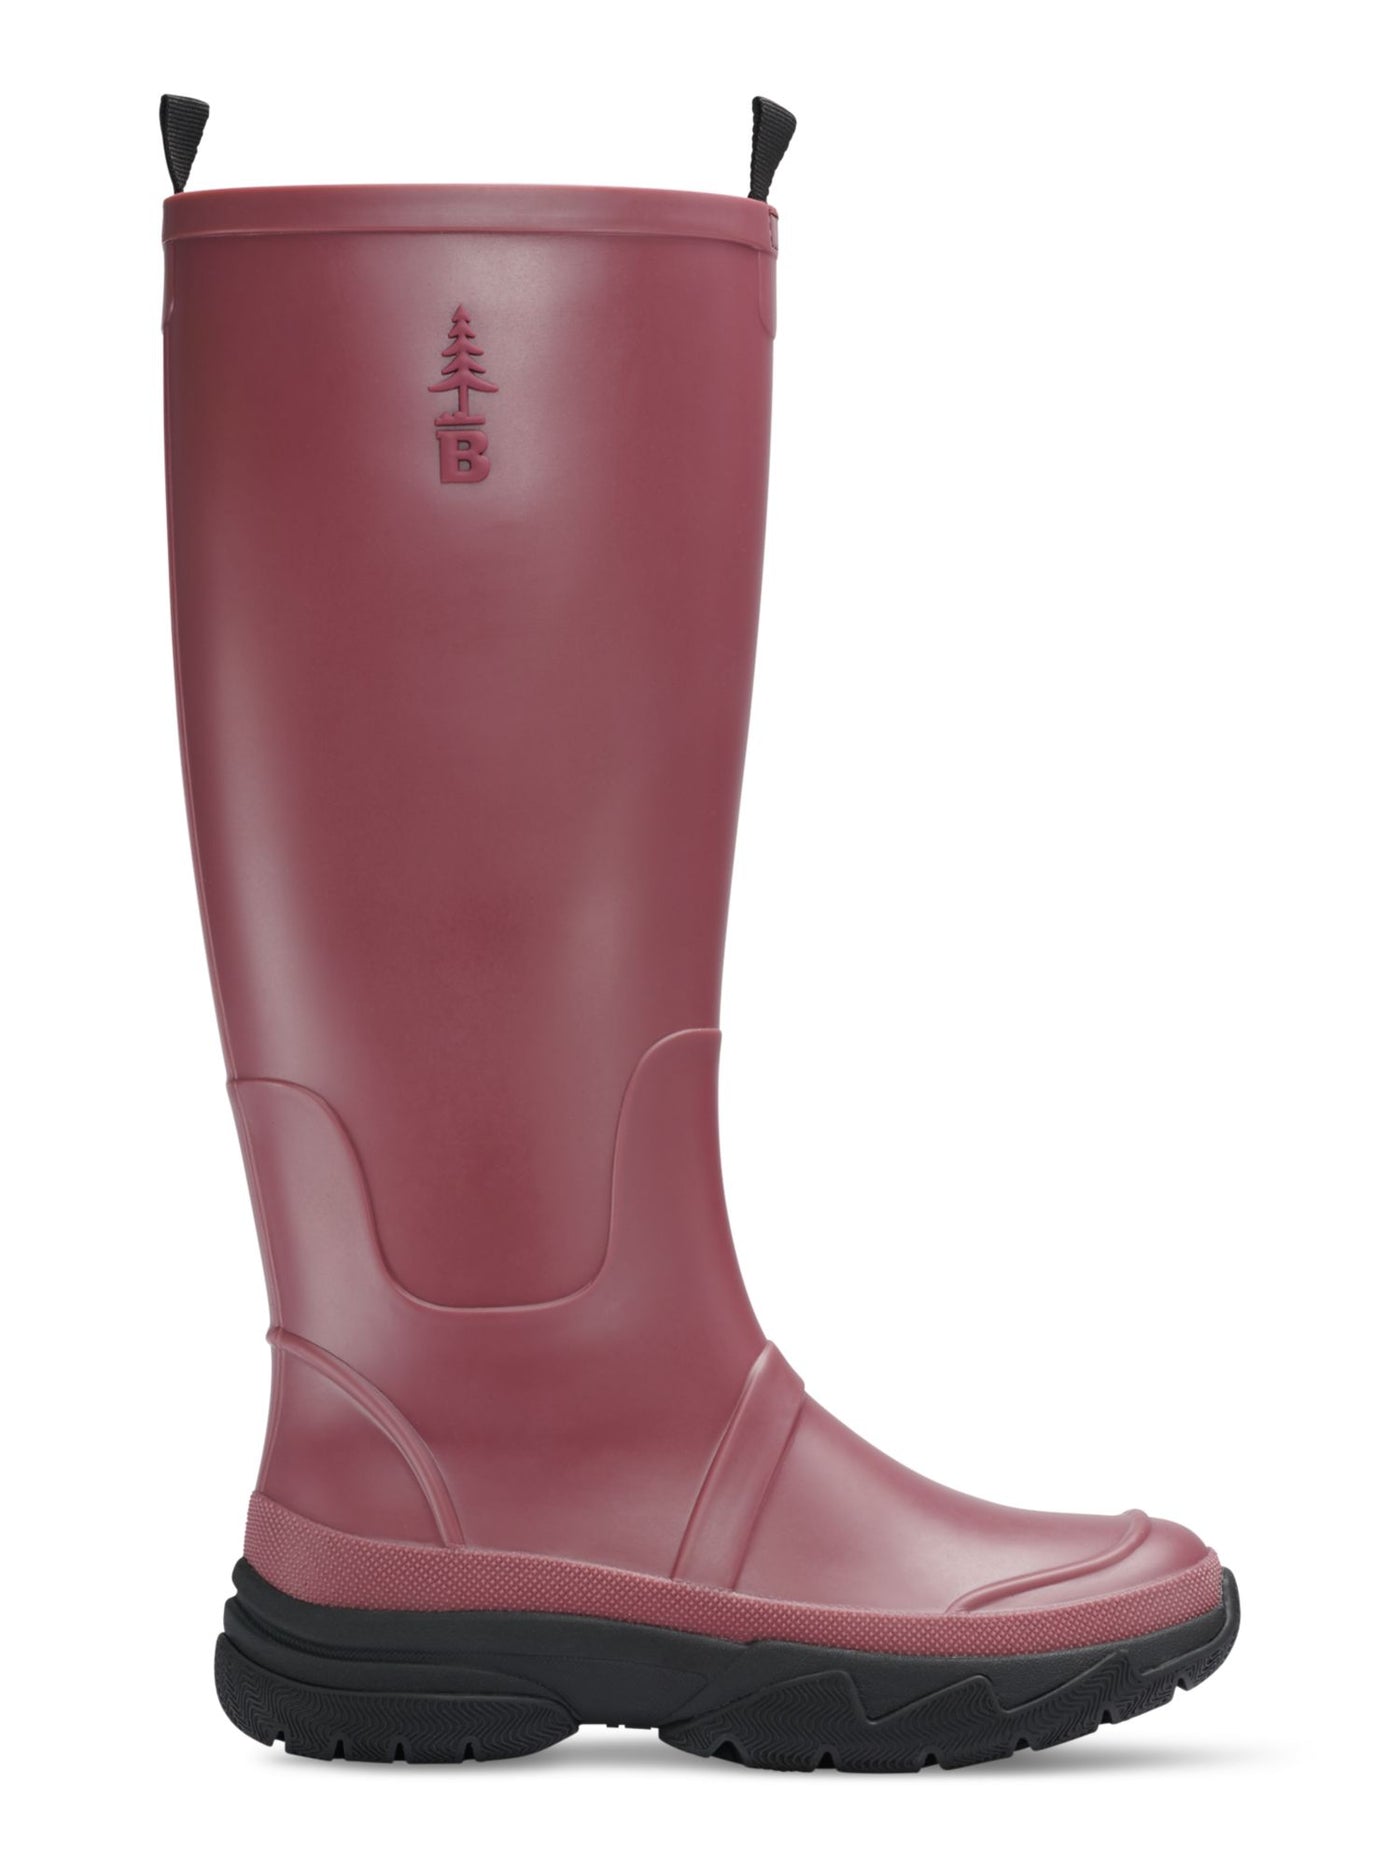 BASS OUTDOOR Womens Burgundy Waterproof Cushioned Removable Insole Field Round Toe Rain Boots 11 M